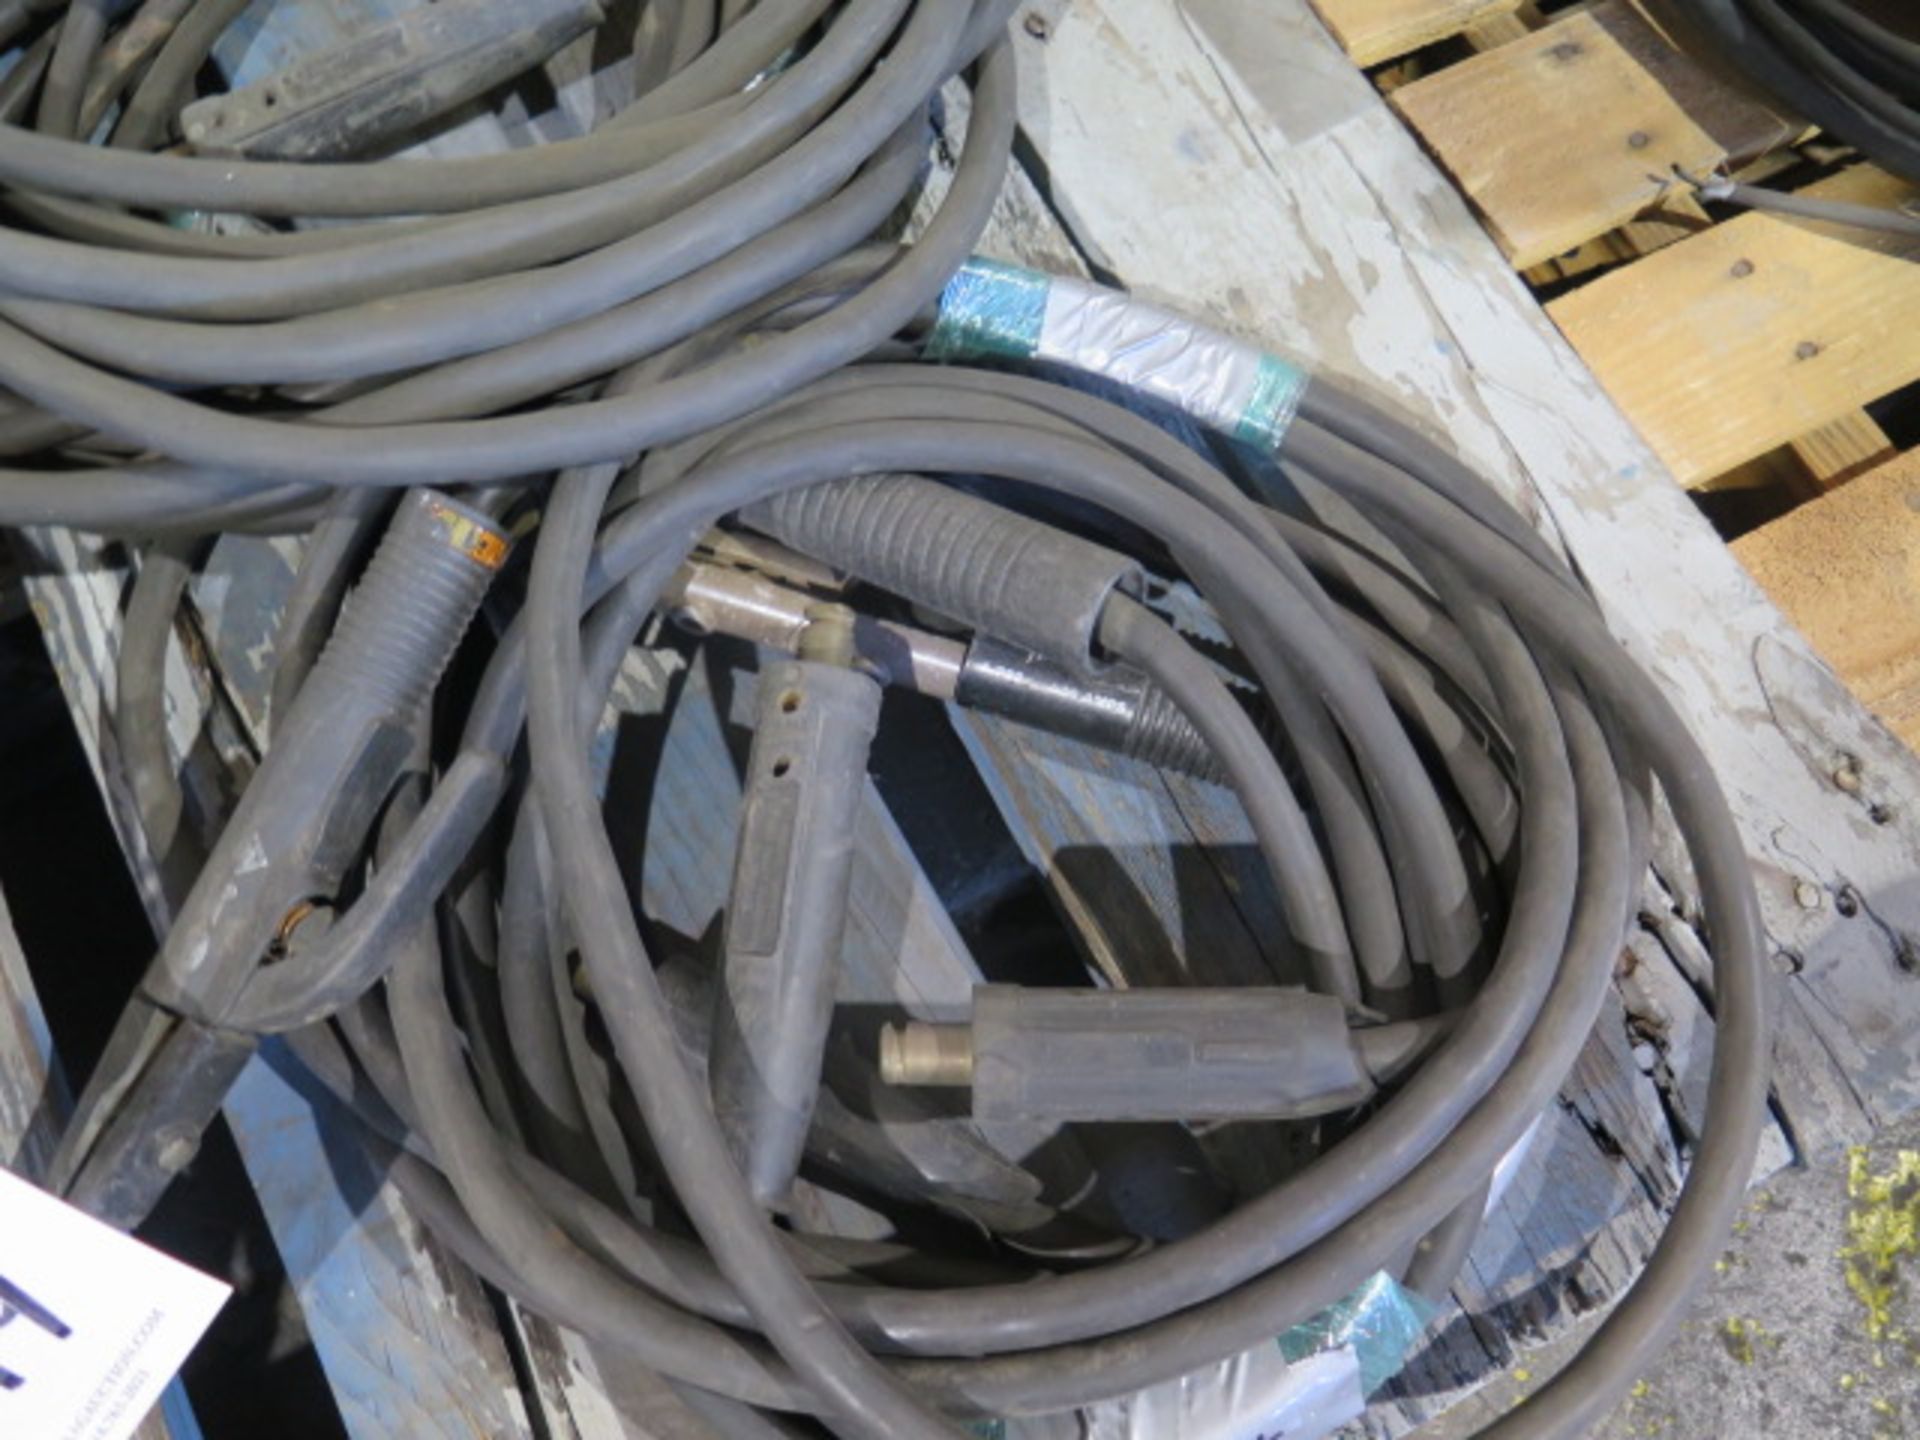 Welding 200 Volt Heavy Duty Welding Leads W/ Ground and Stingers (SOLD AS-IS - NO WARRANTY) - Image 2 of 6